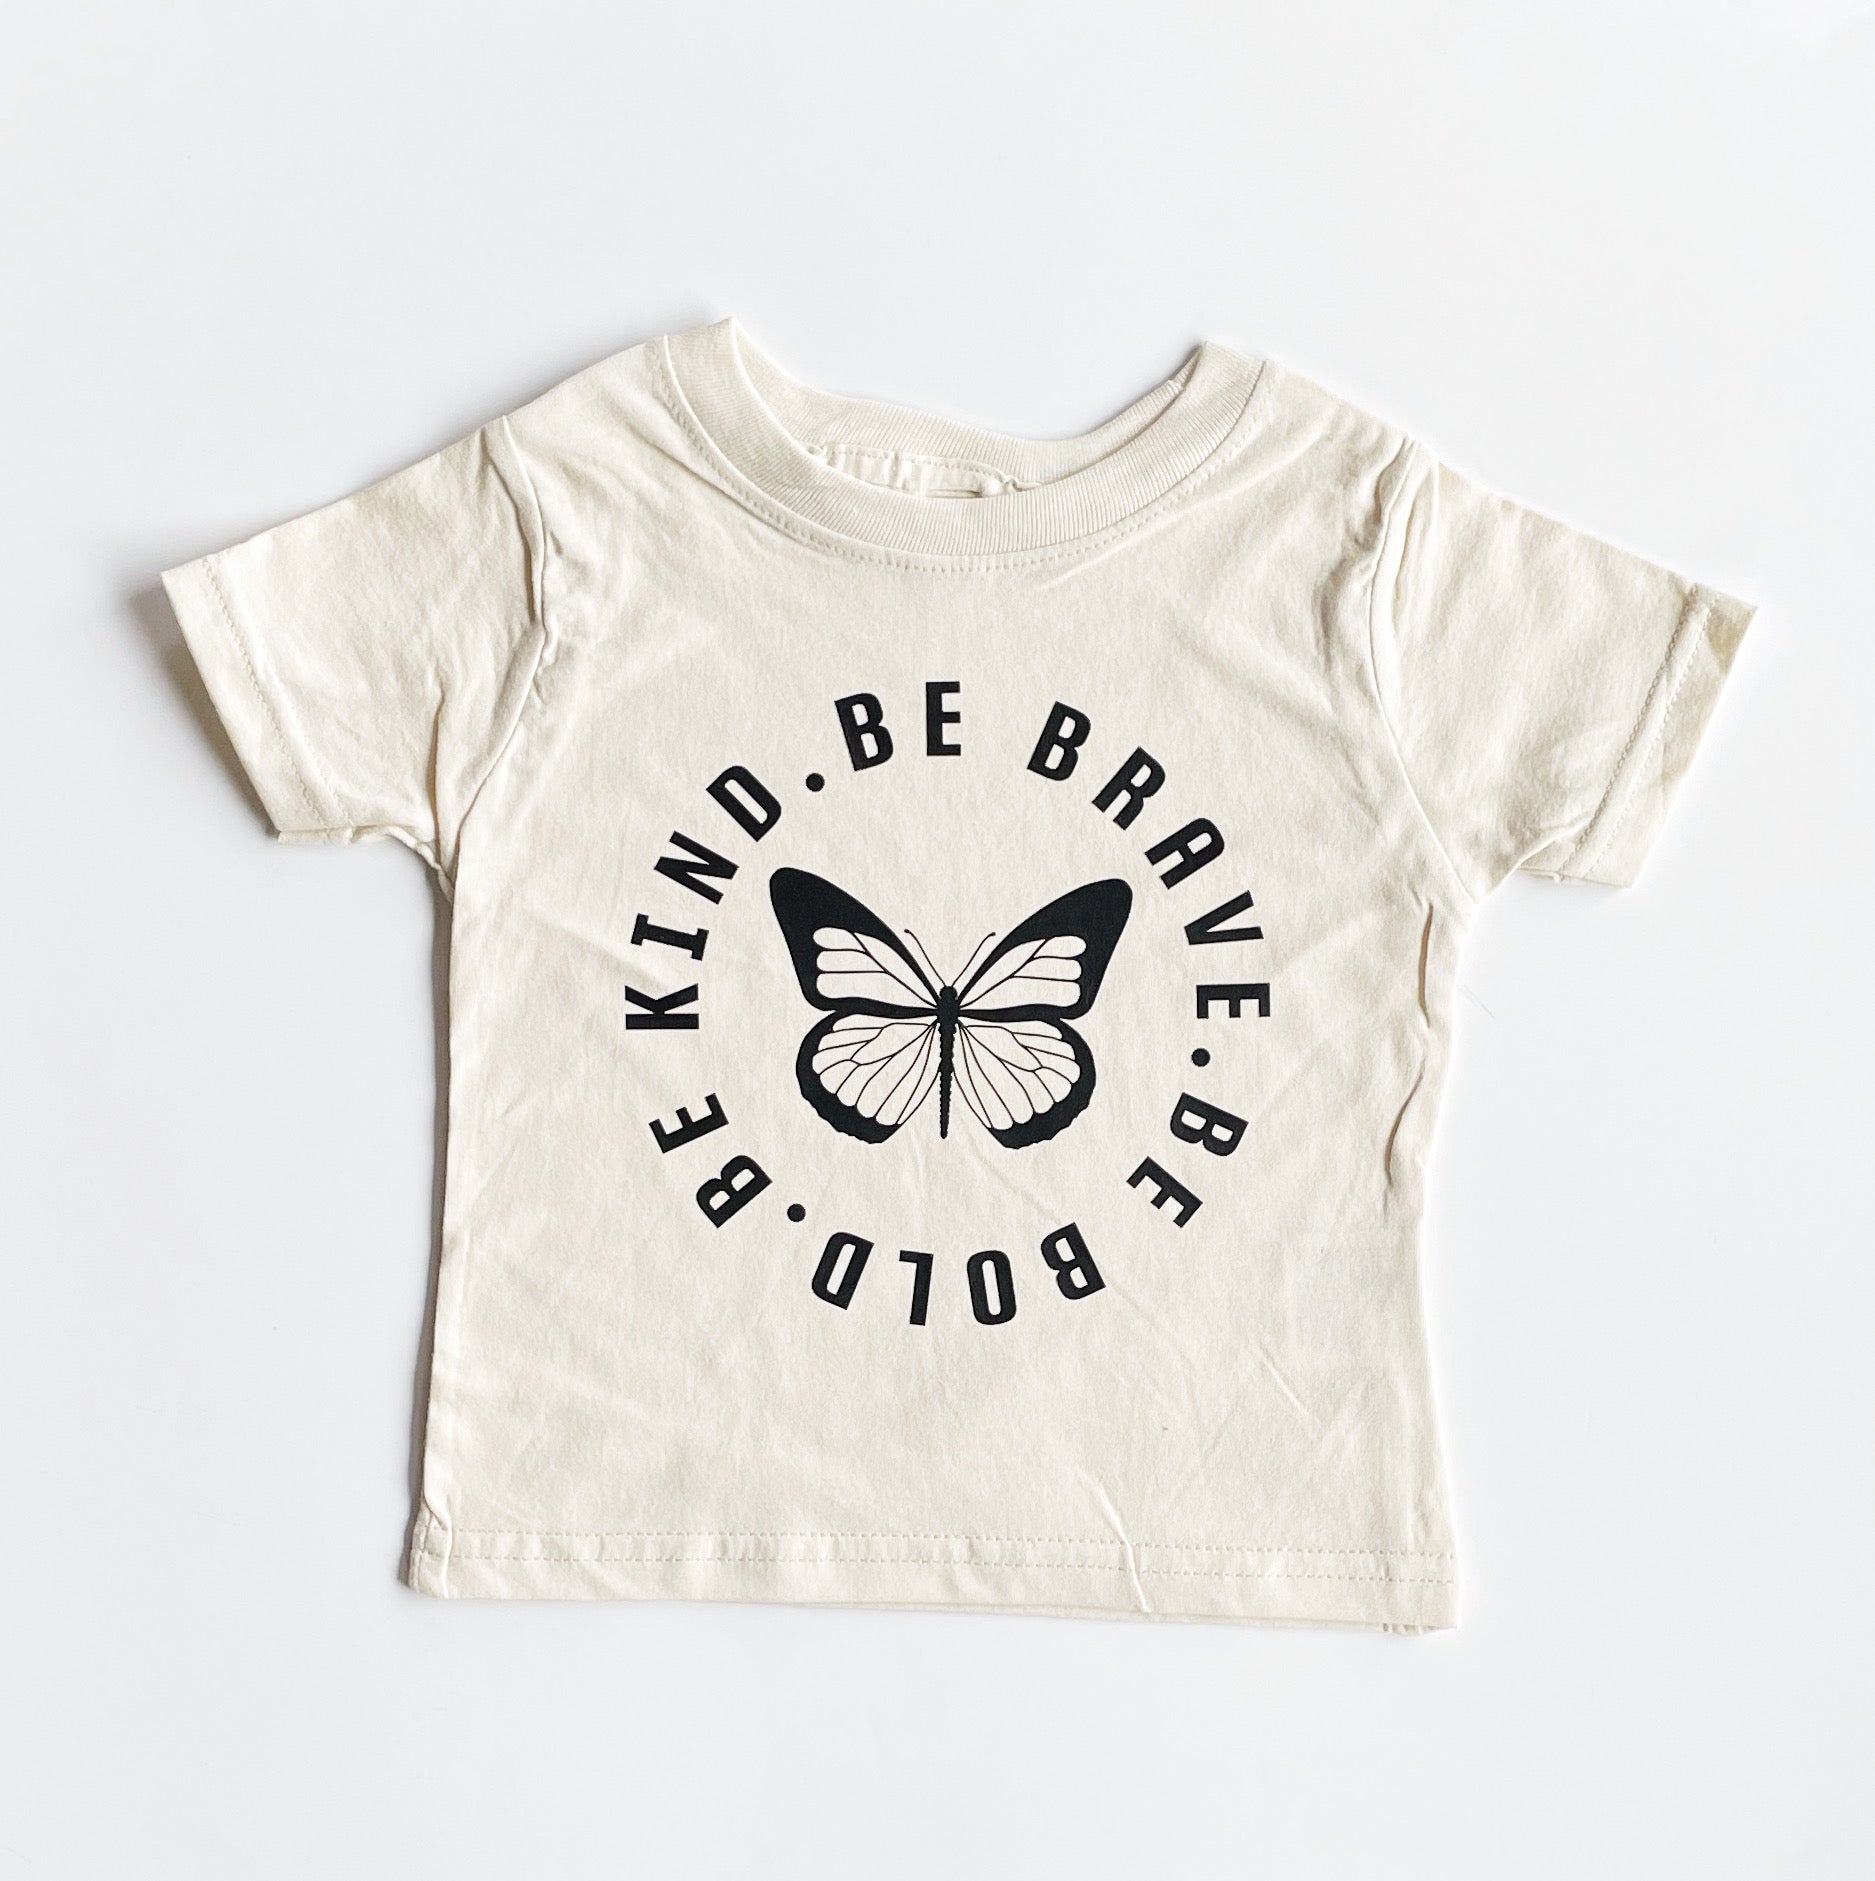 BABE TEE | Be bold. Be brave. Be kind.